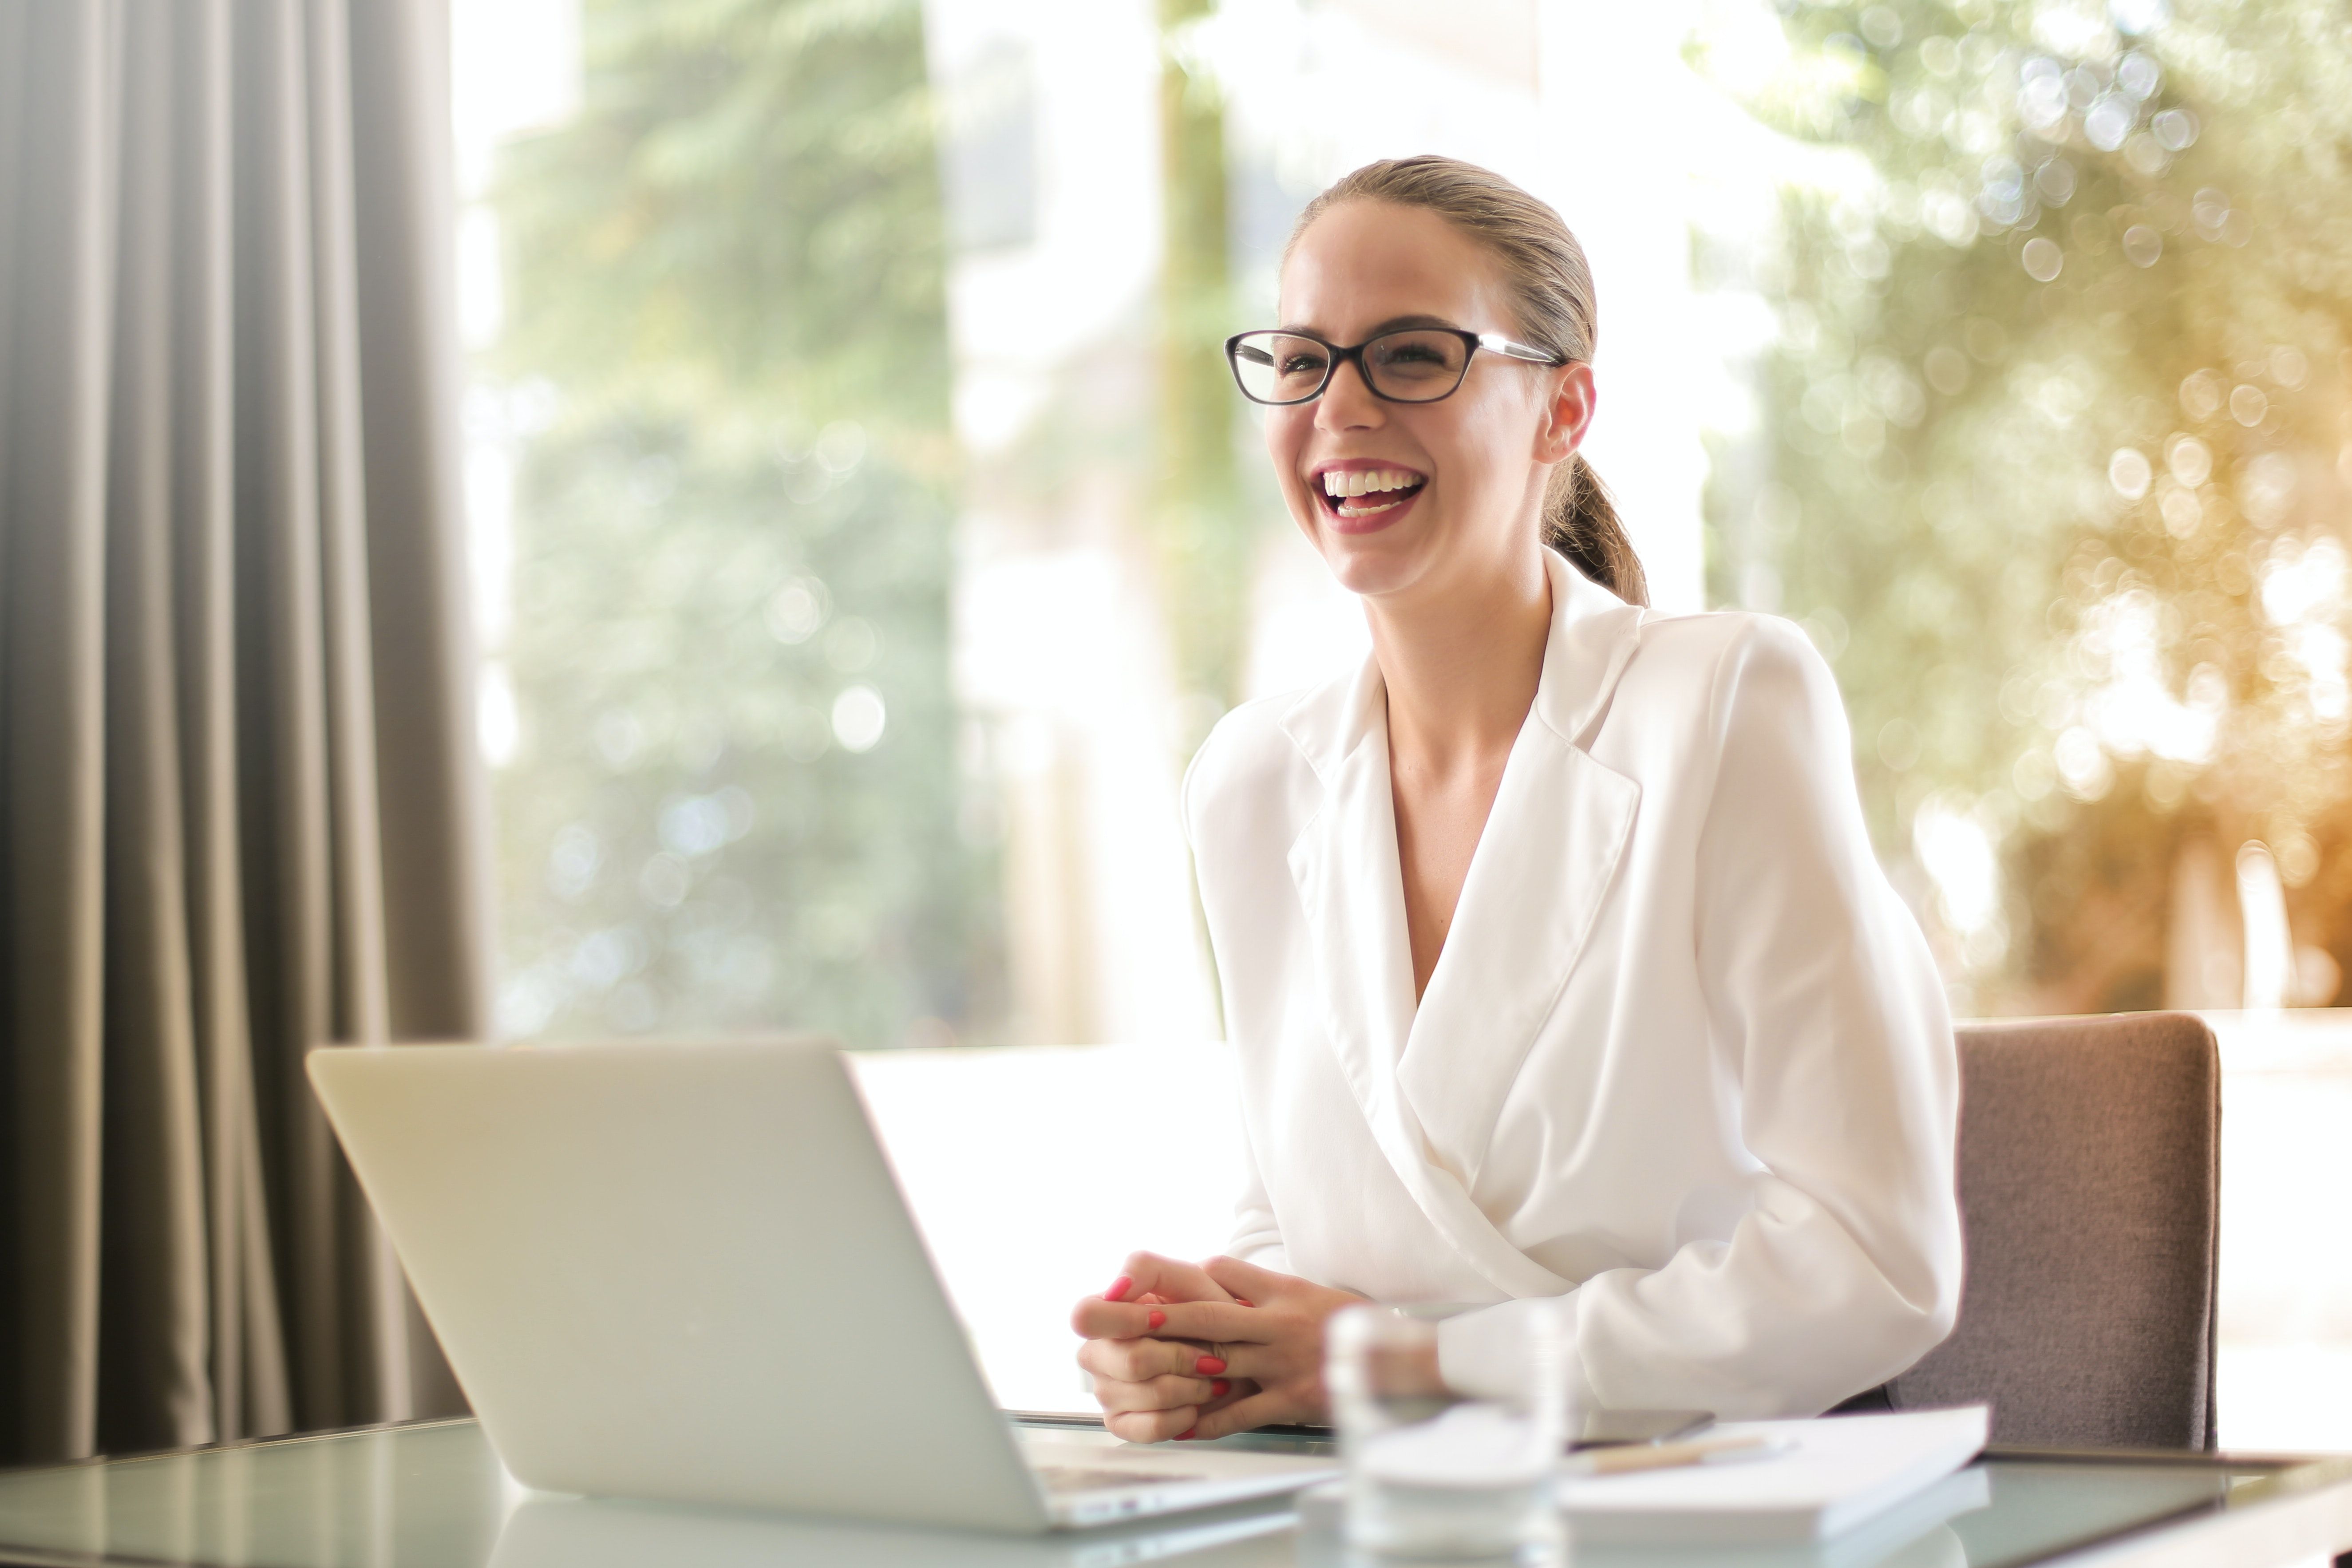 Woman wearing white shirt and glasses smiling in front of a computer